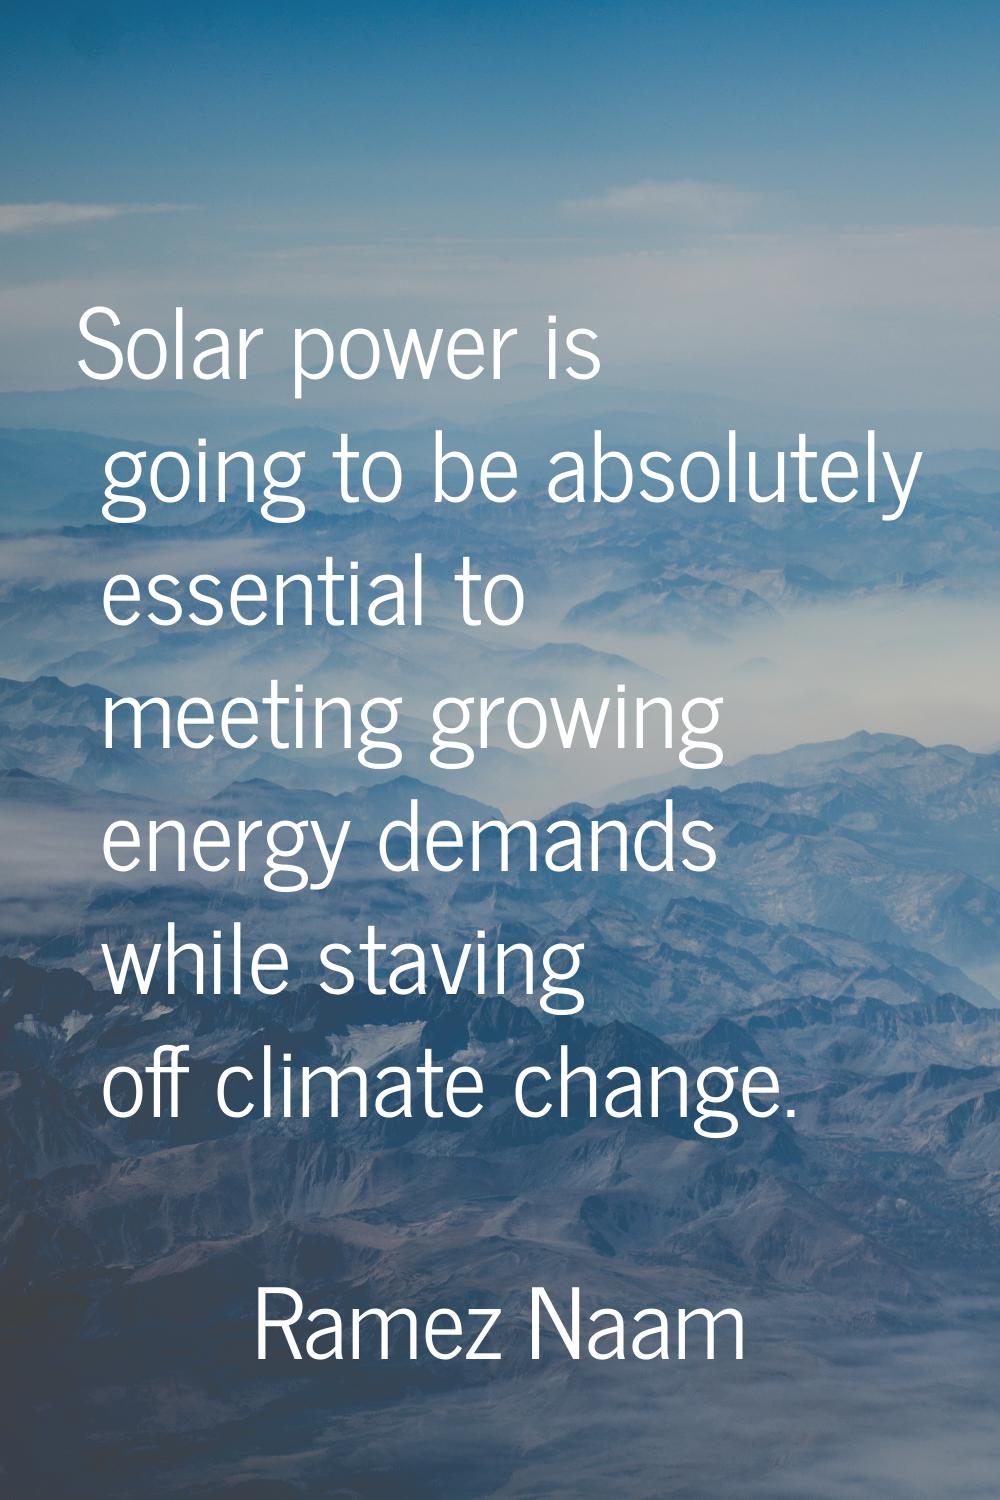 Solar power is going to be absolutely essential to meeting growing energy demands while staving off